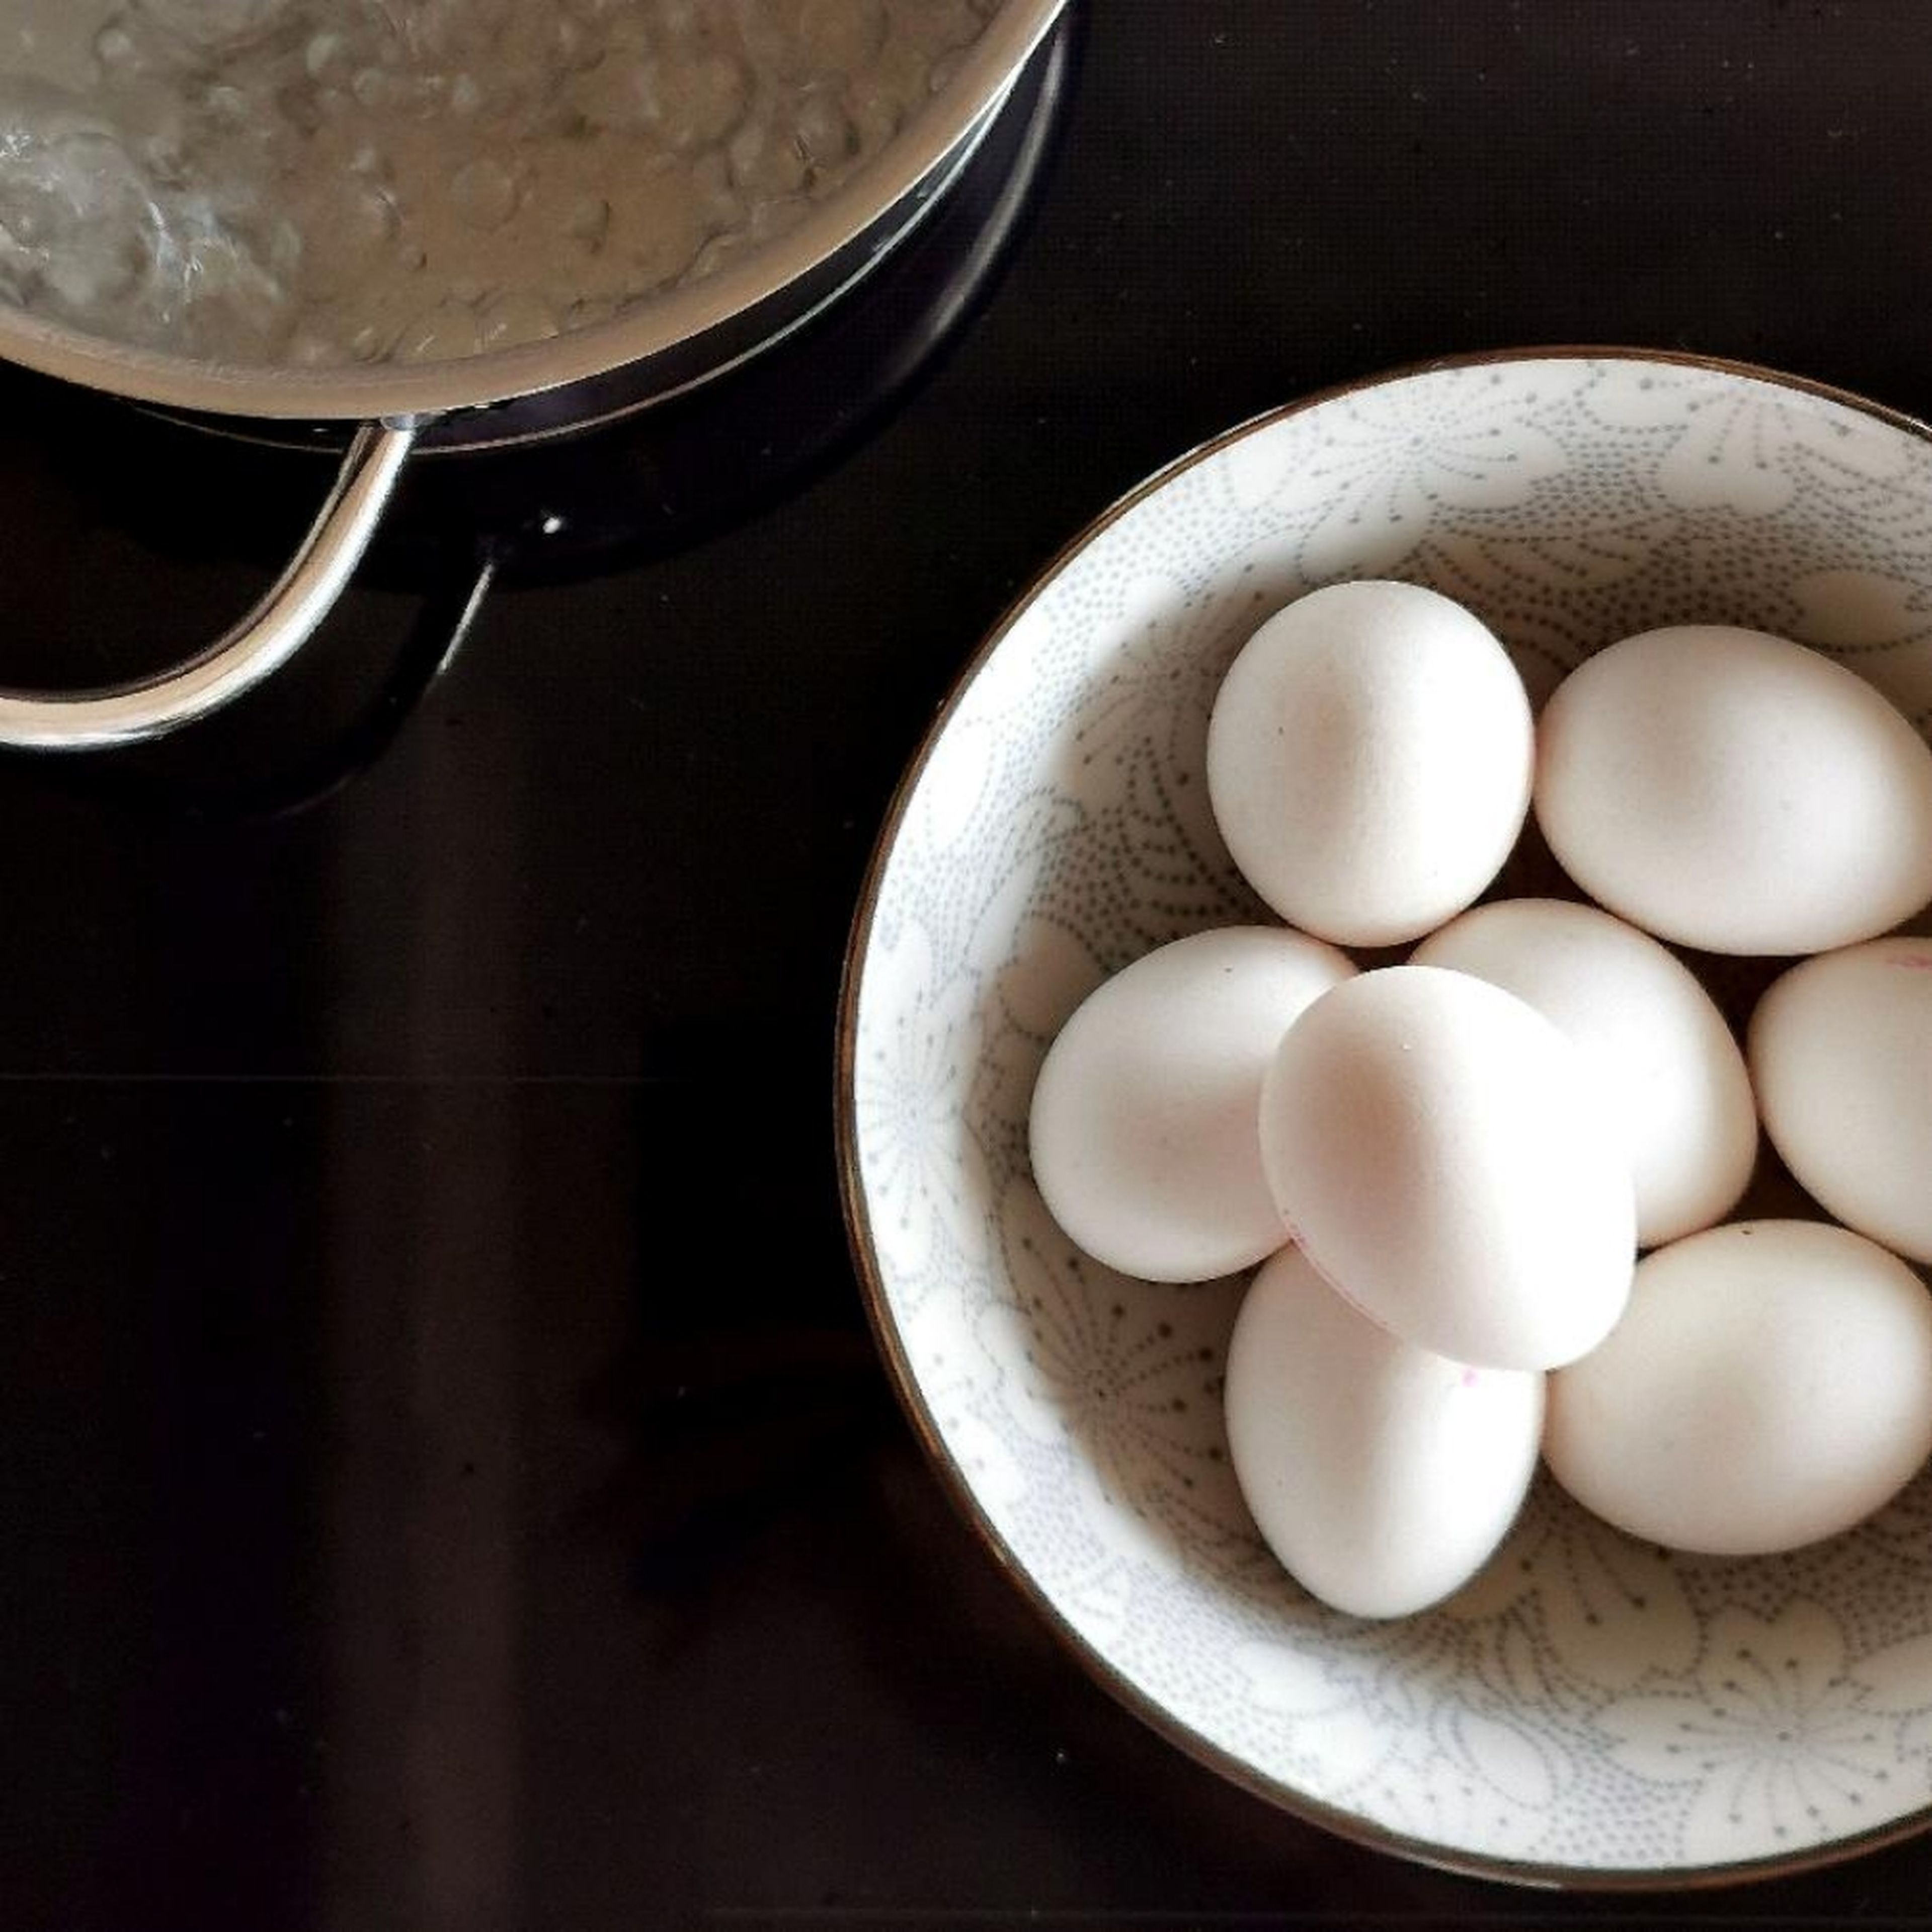 Cook eggs in boiling water for approx. 8 min., then drain and peel.